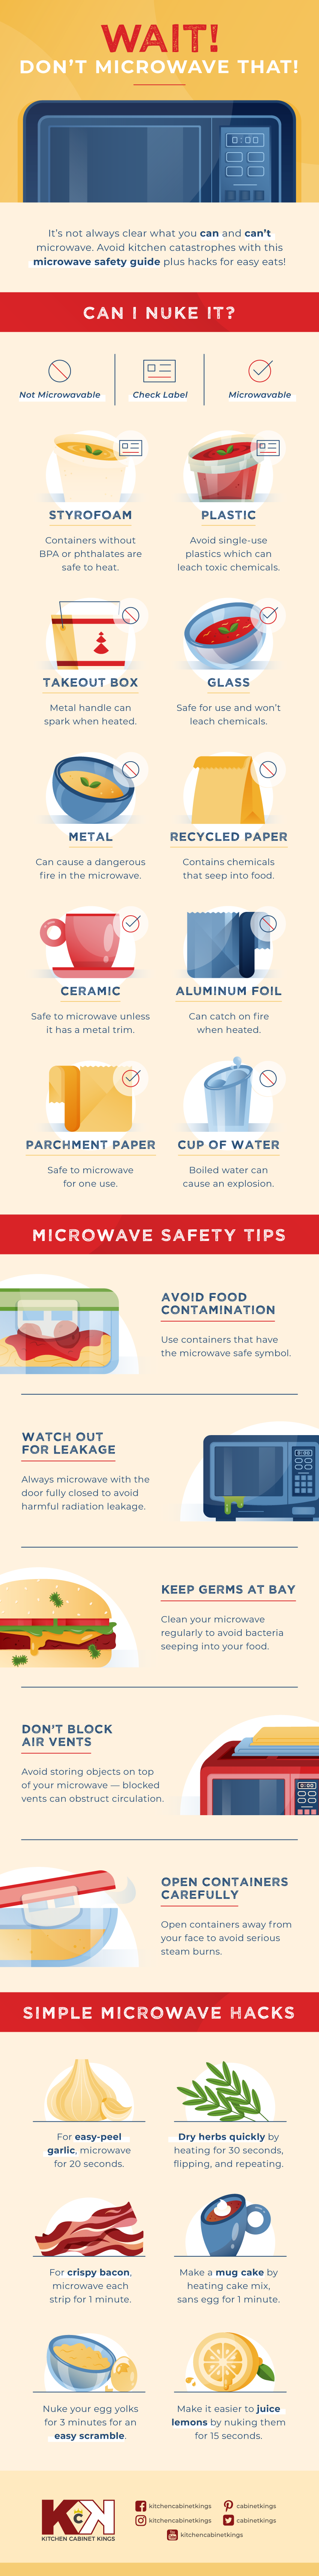 10 Things that Should Never Go in Your Microwave